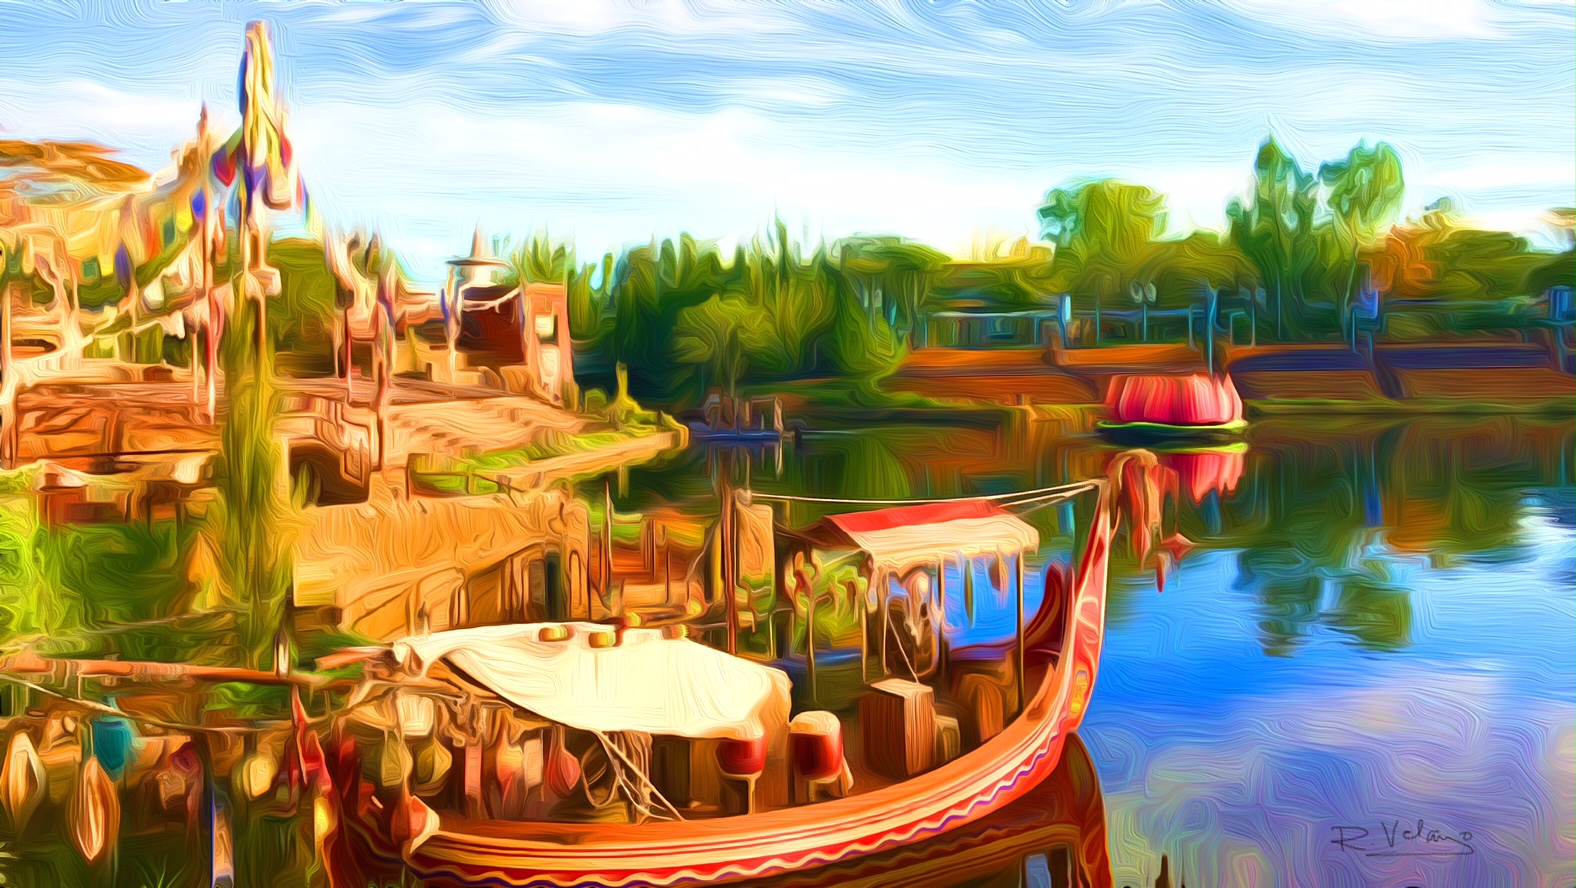 "DISCOVERY RIVER AREA AT DISNEY’S ANIMAL KINGDOM" [Created: 3/23/2021]